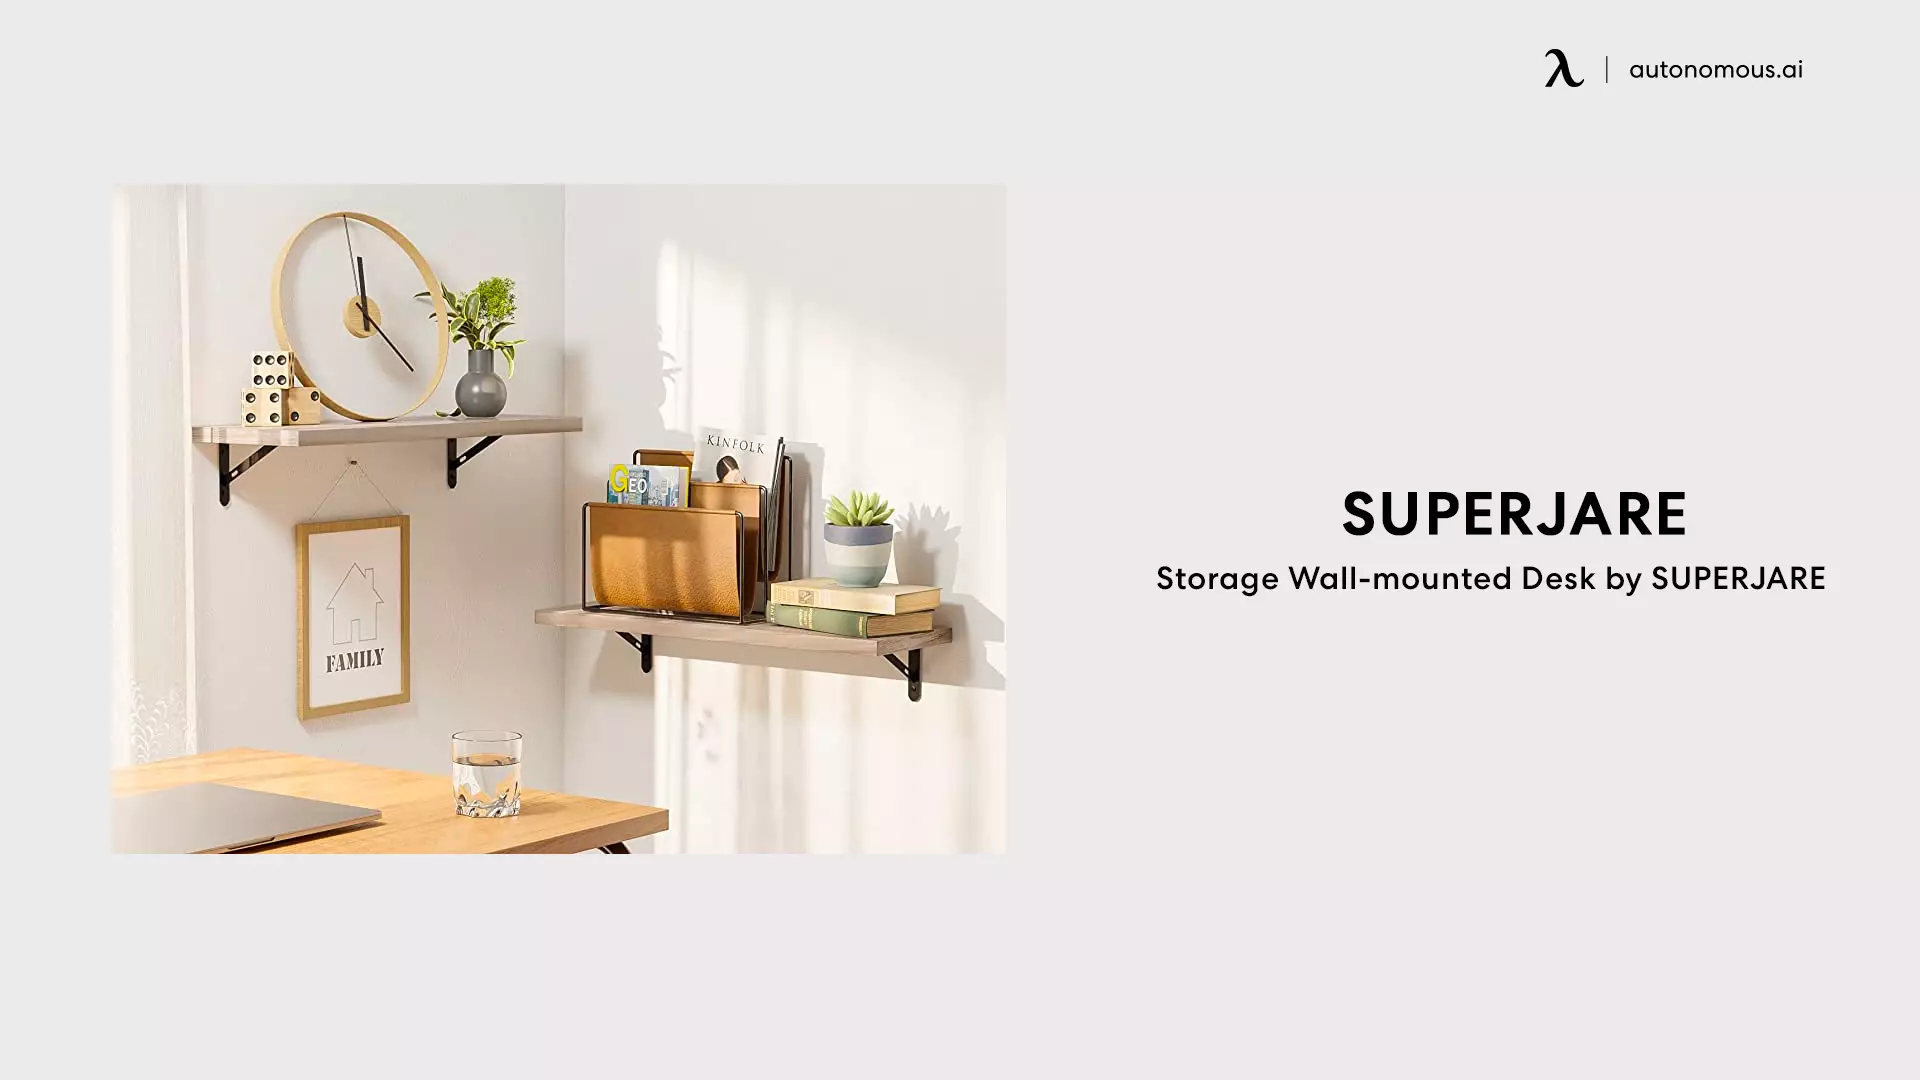 Storage Wall-mounted Desk by SUPERJARE